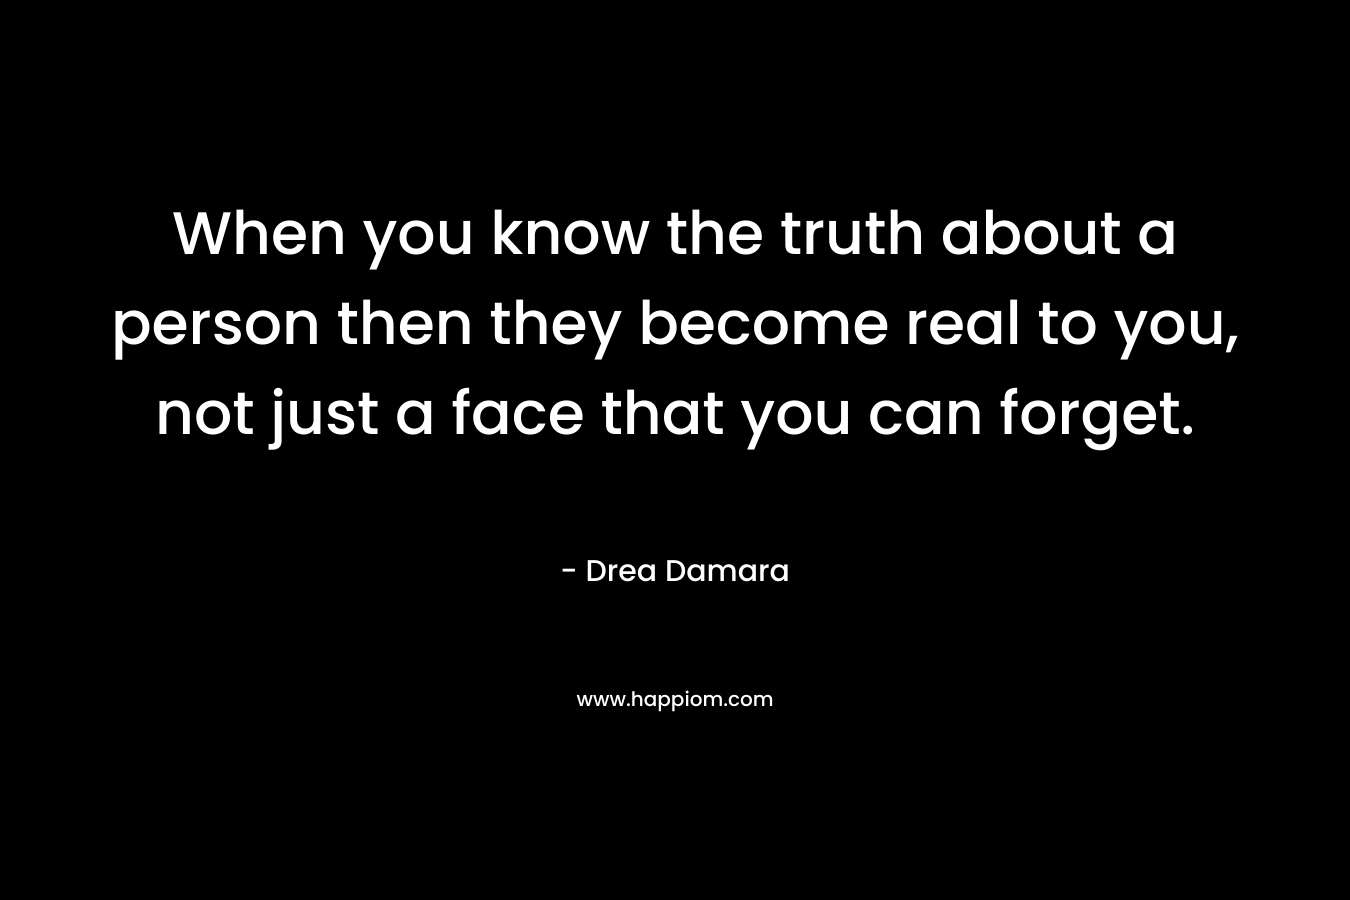 When you know the truth about a person then they become real to you, not just a face that you can forget. – Drea Damara